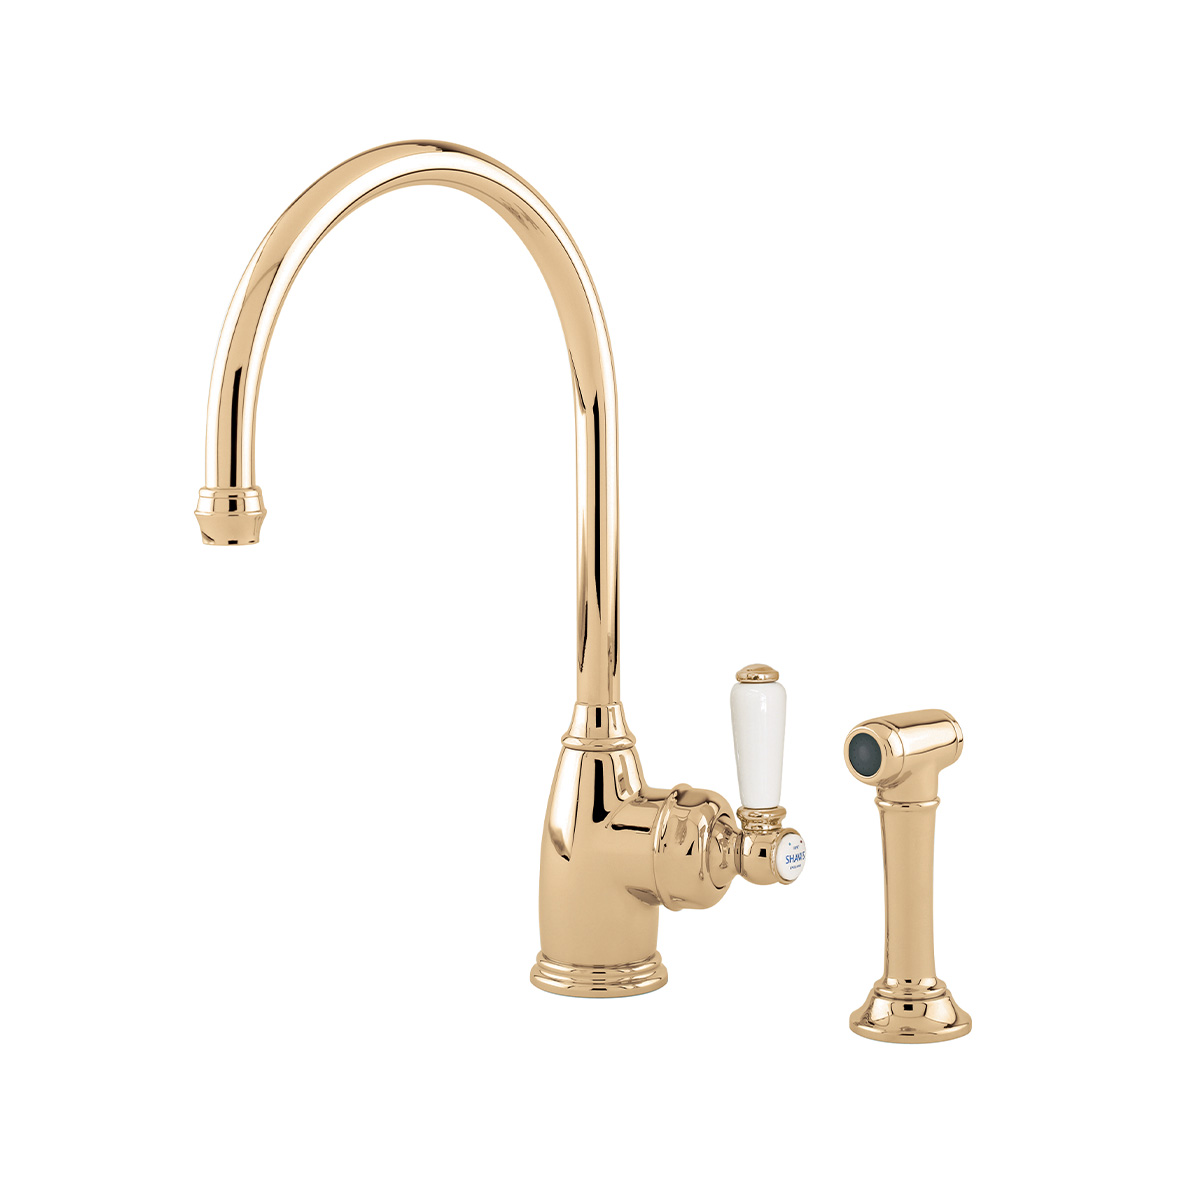 Shaws by Perrin & Rowe Yarrow kitchen mixer with spray rinse in Polished Brass. Parthian style monobloc kitchen tap AUSH.4346. Distributed in Australia by Luxe by Design, Brisbane.